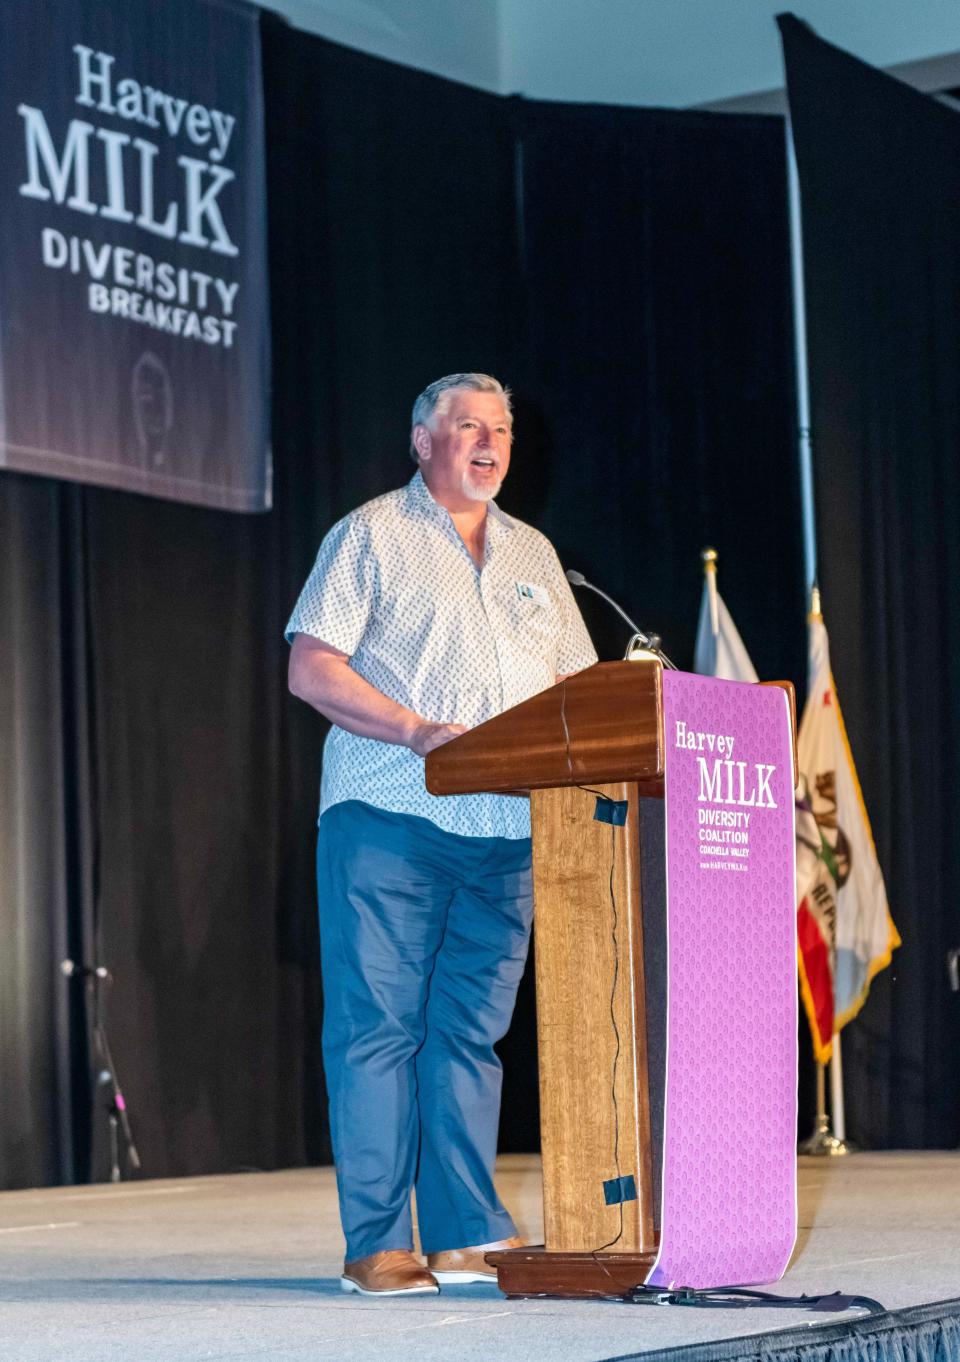 Ron deHarte, founding chair of the Harvey Milk Diversity Breakfast Coalition, addresses the crowd on May 11, 2022.